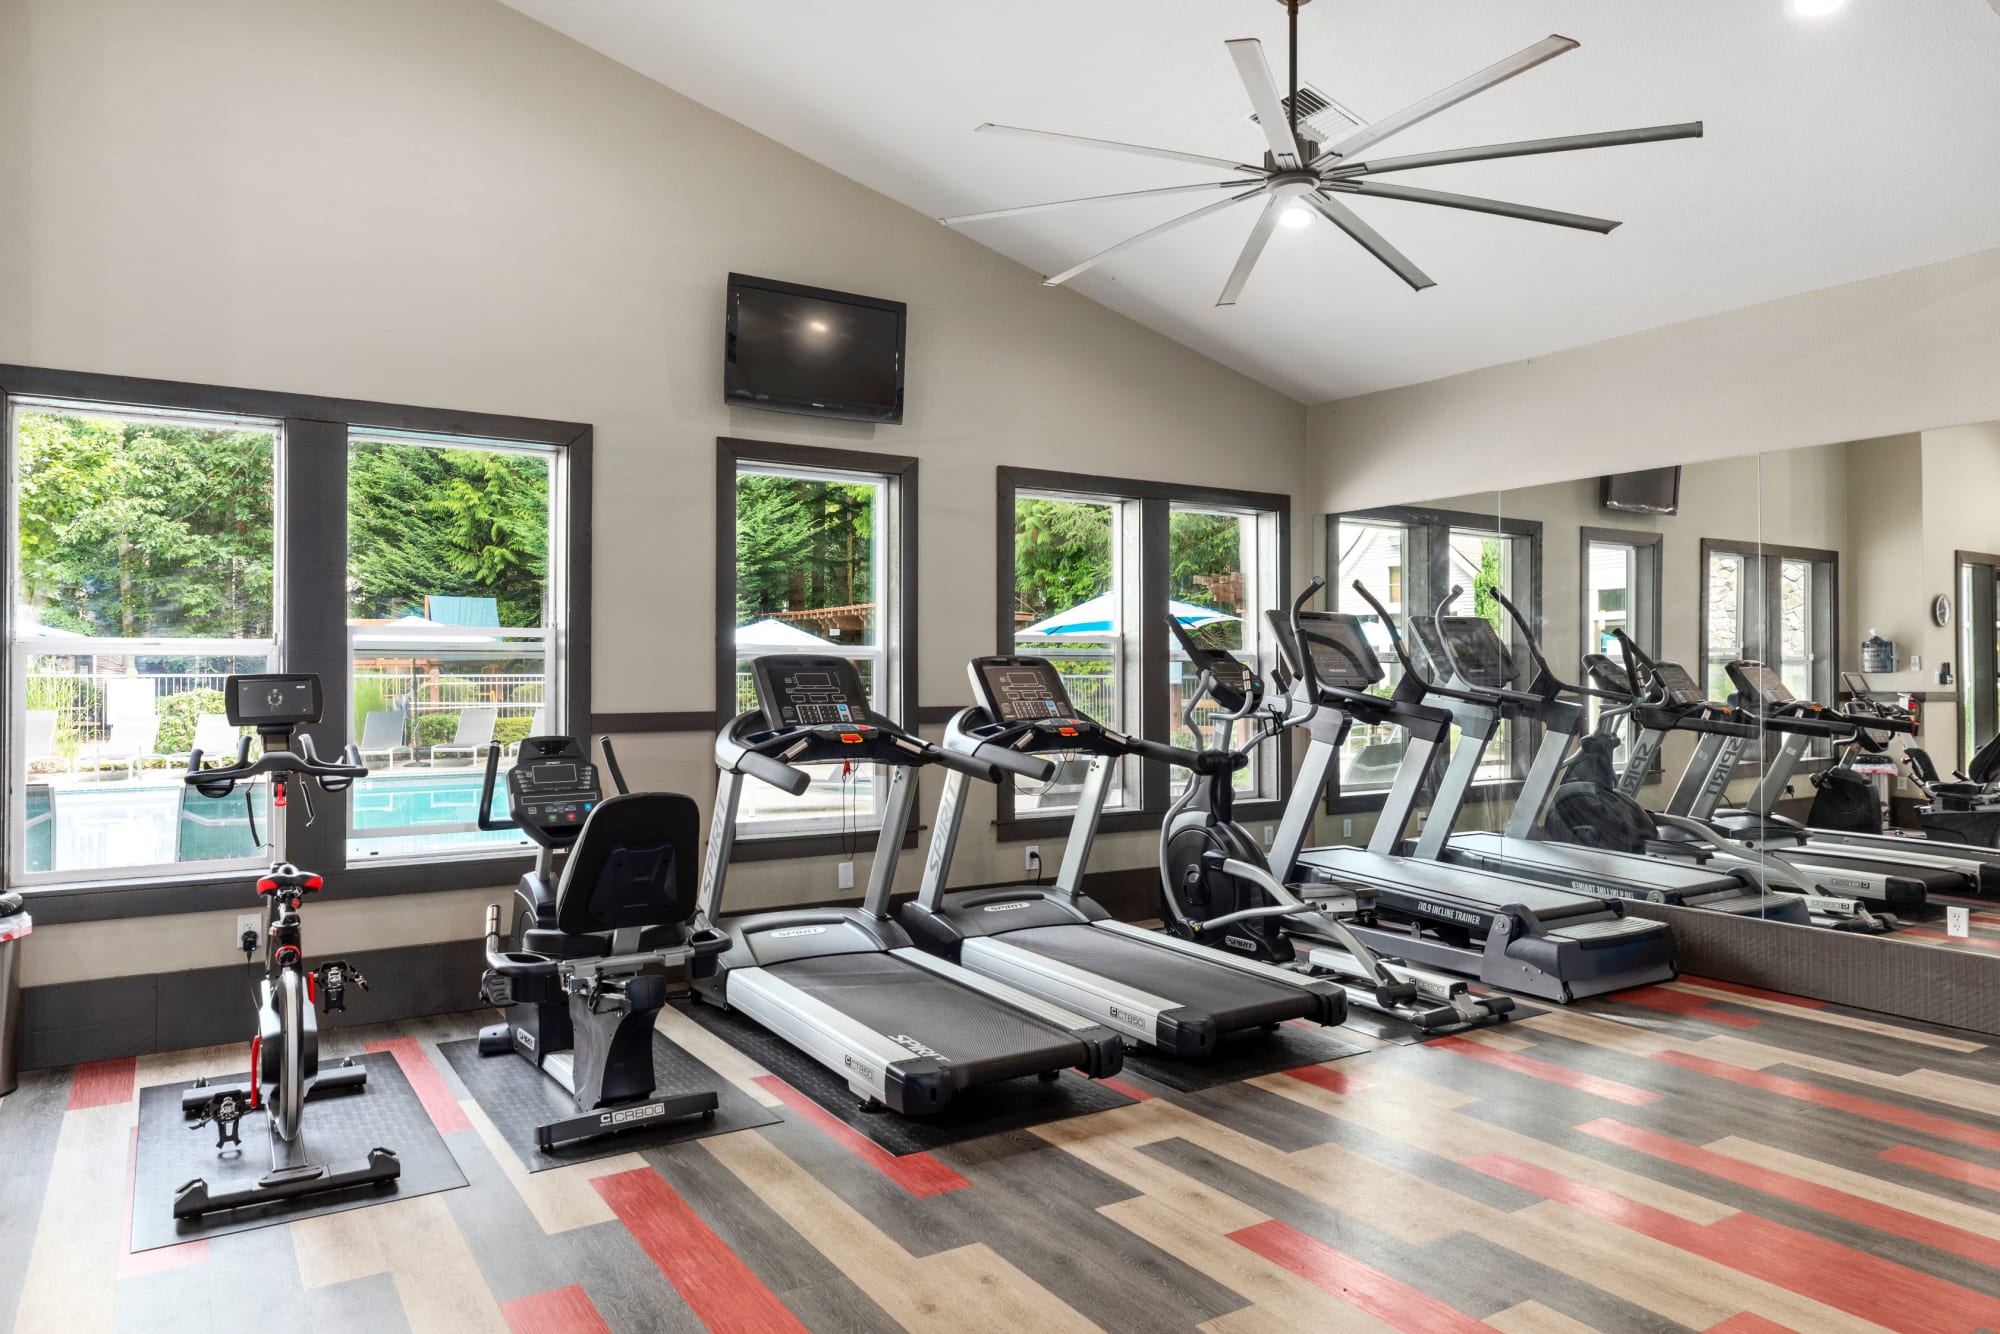 Newly renovated fitness center with views to the pool at Wildreed Apartments in Everett, Washington